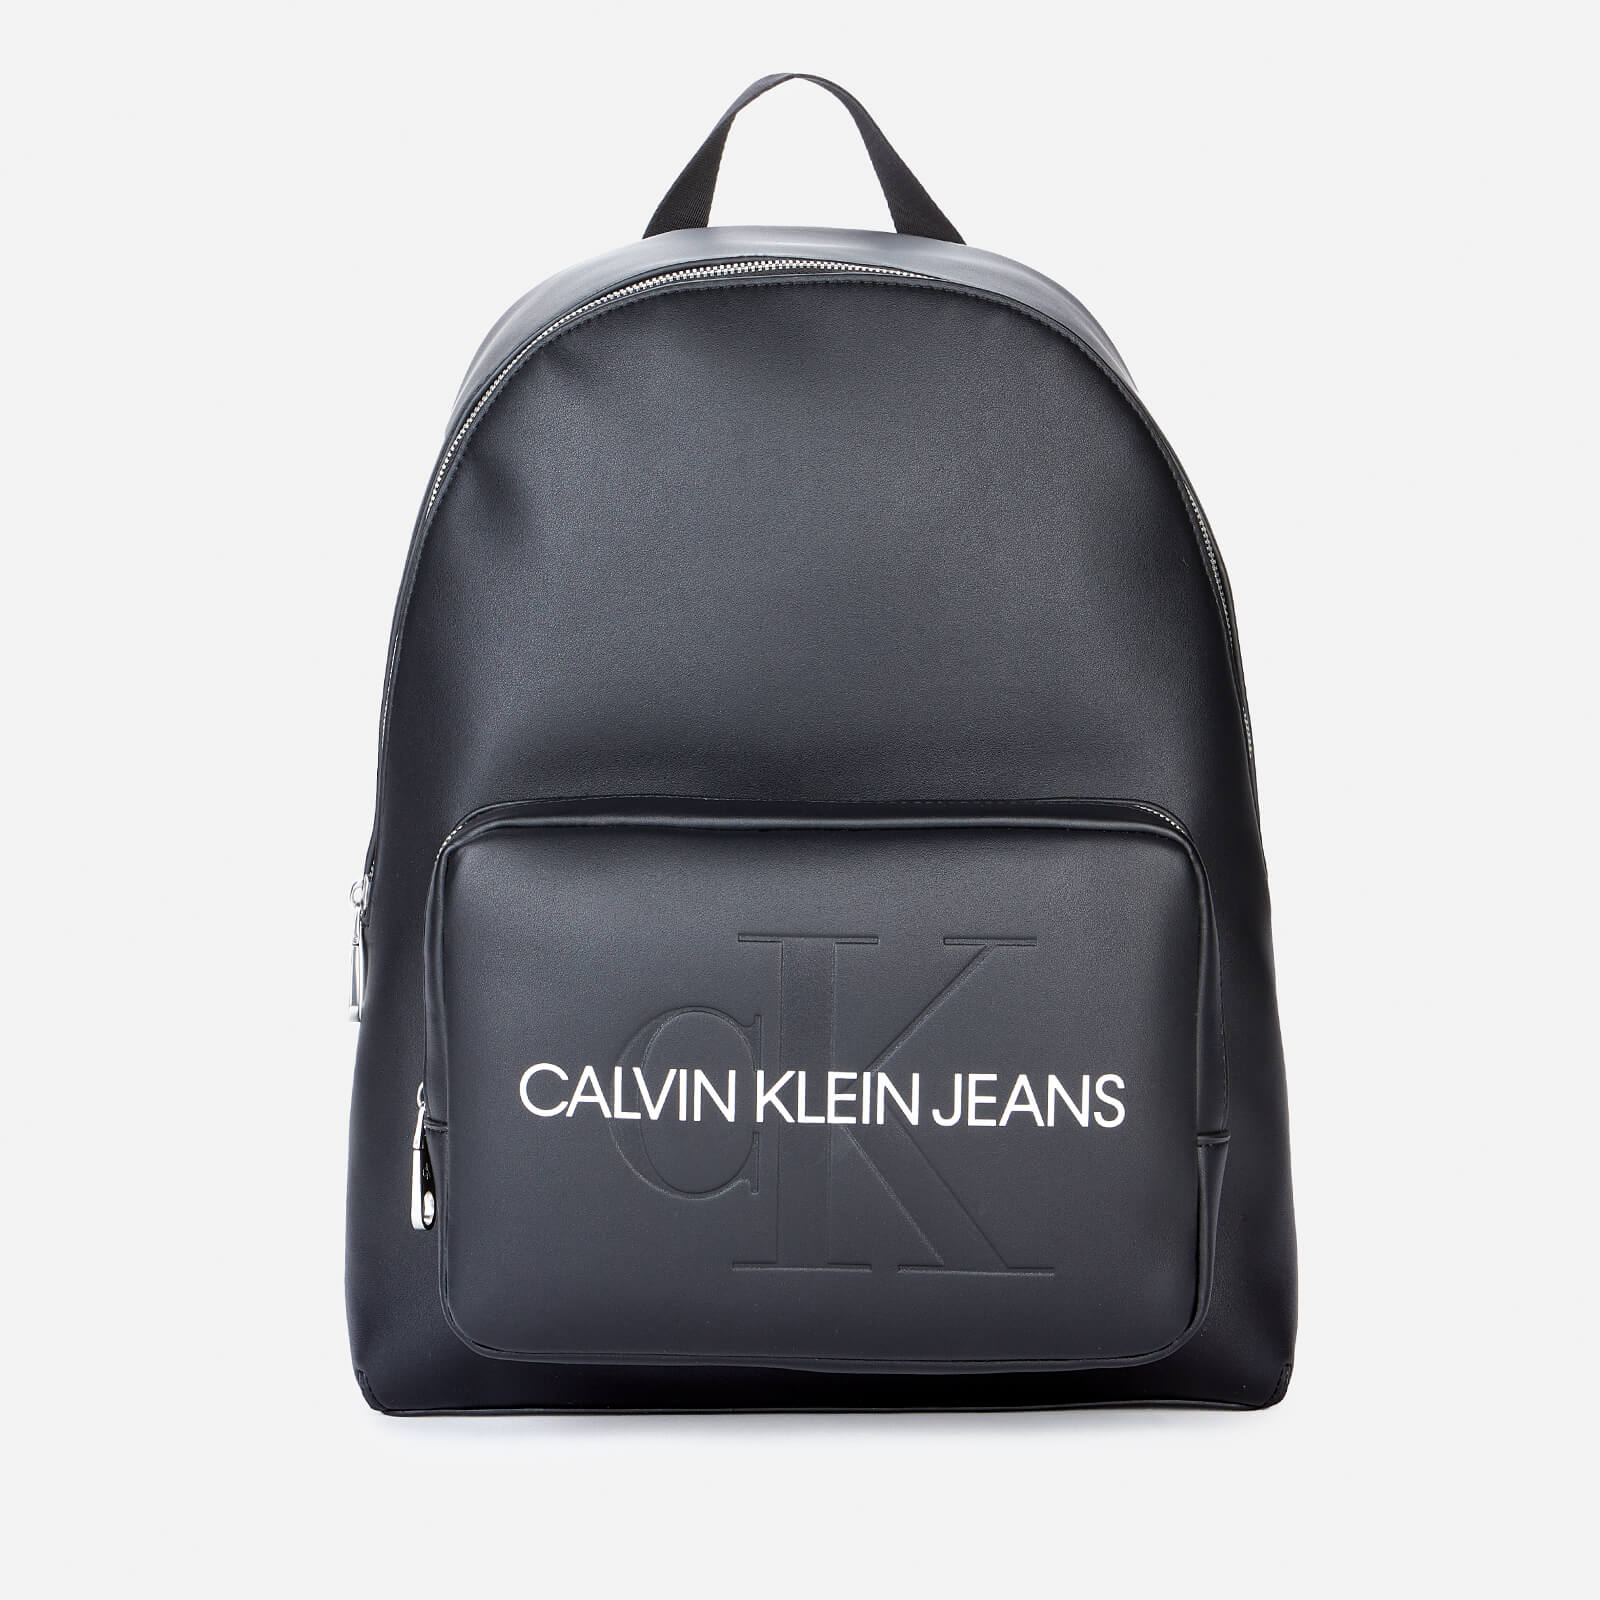 Calvin Klein Jeans Women's Campus Backpack with Pckt 40 - Black